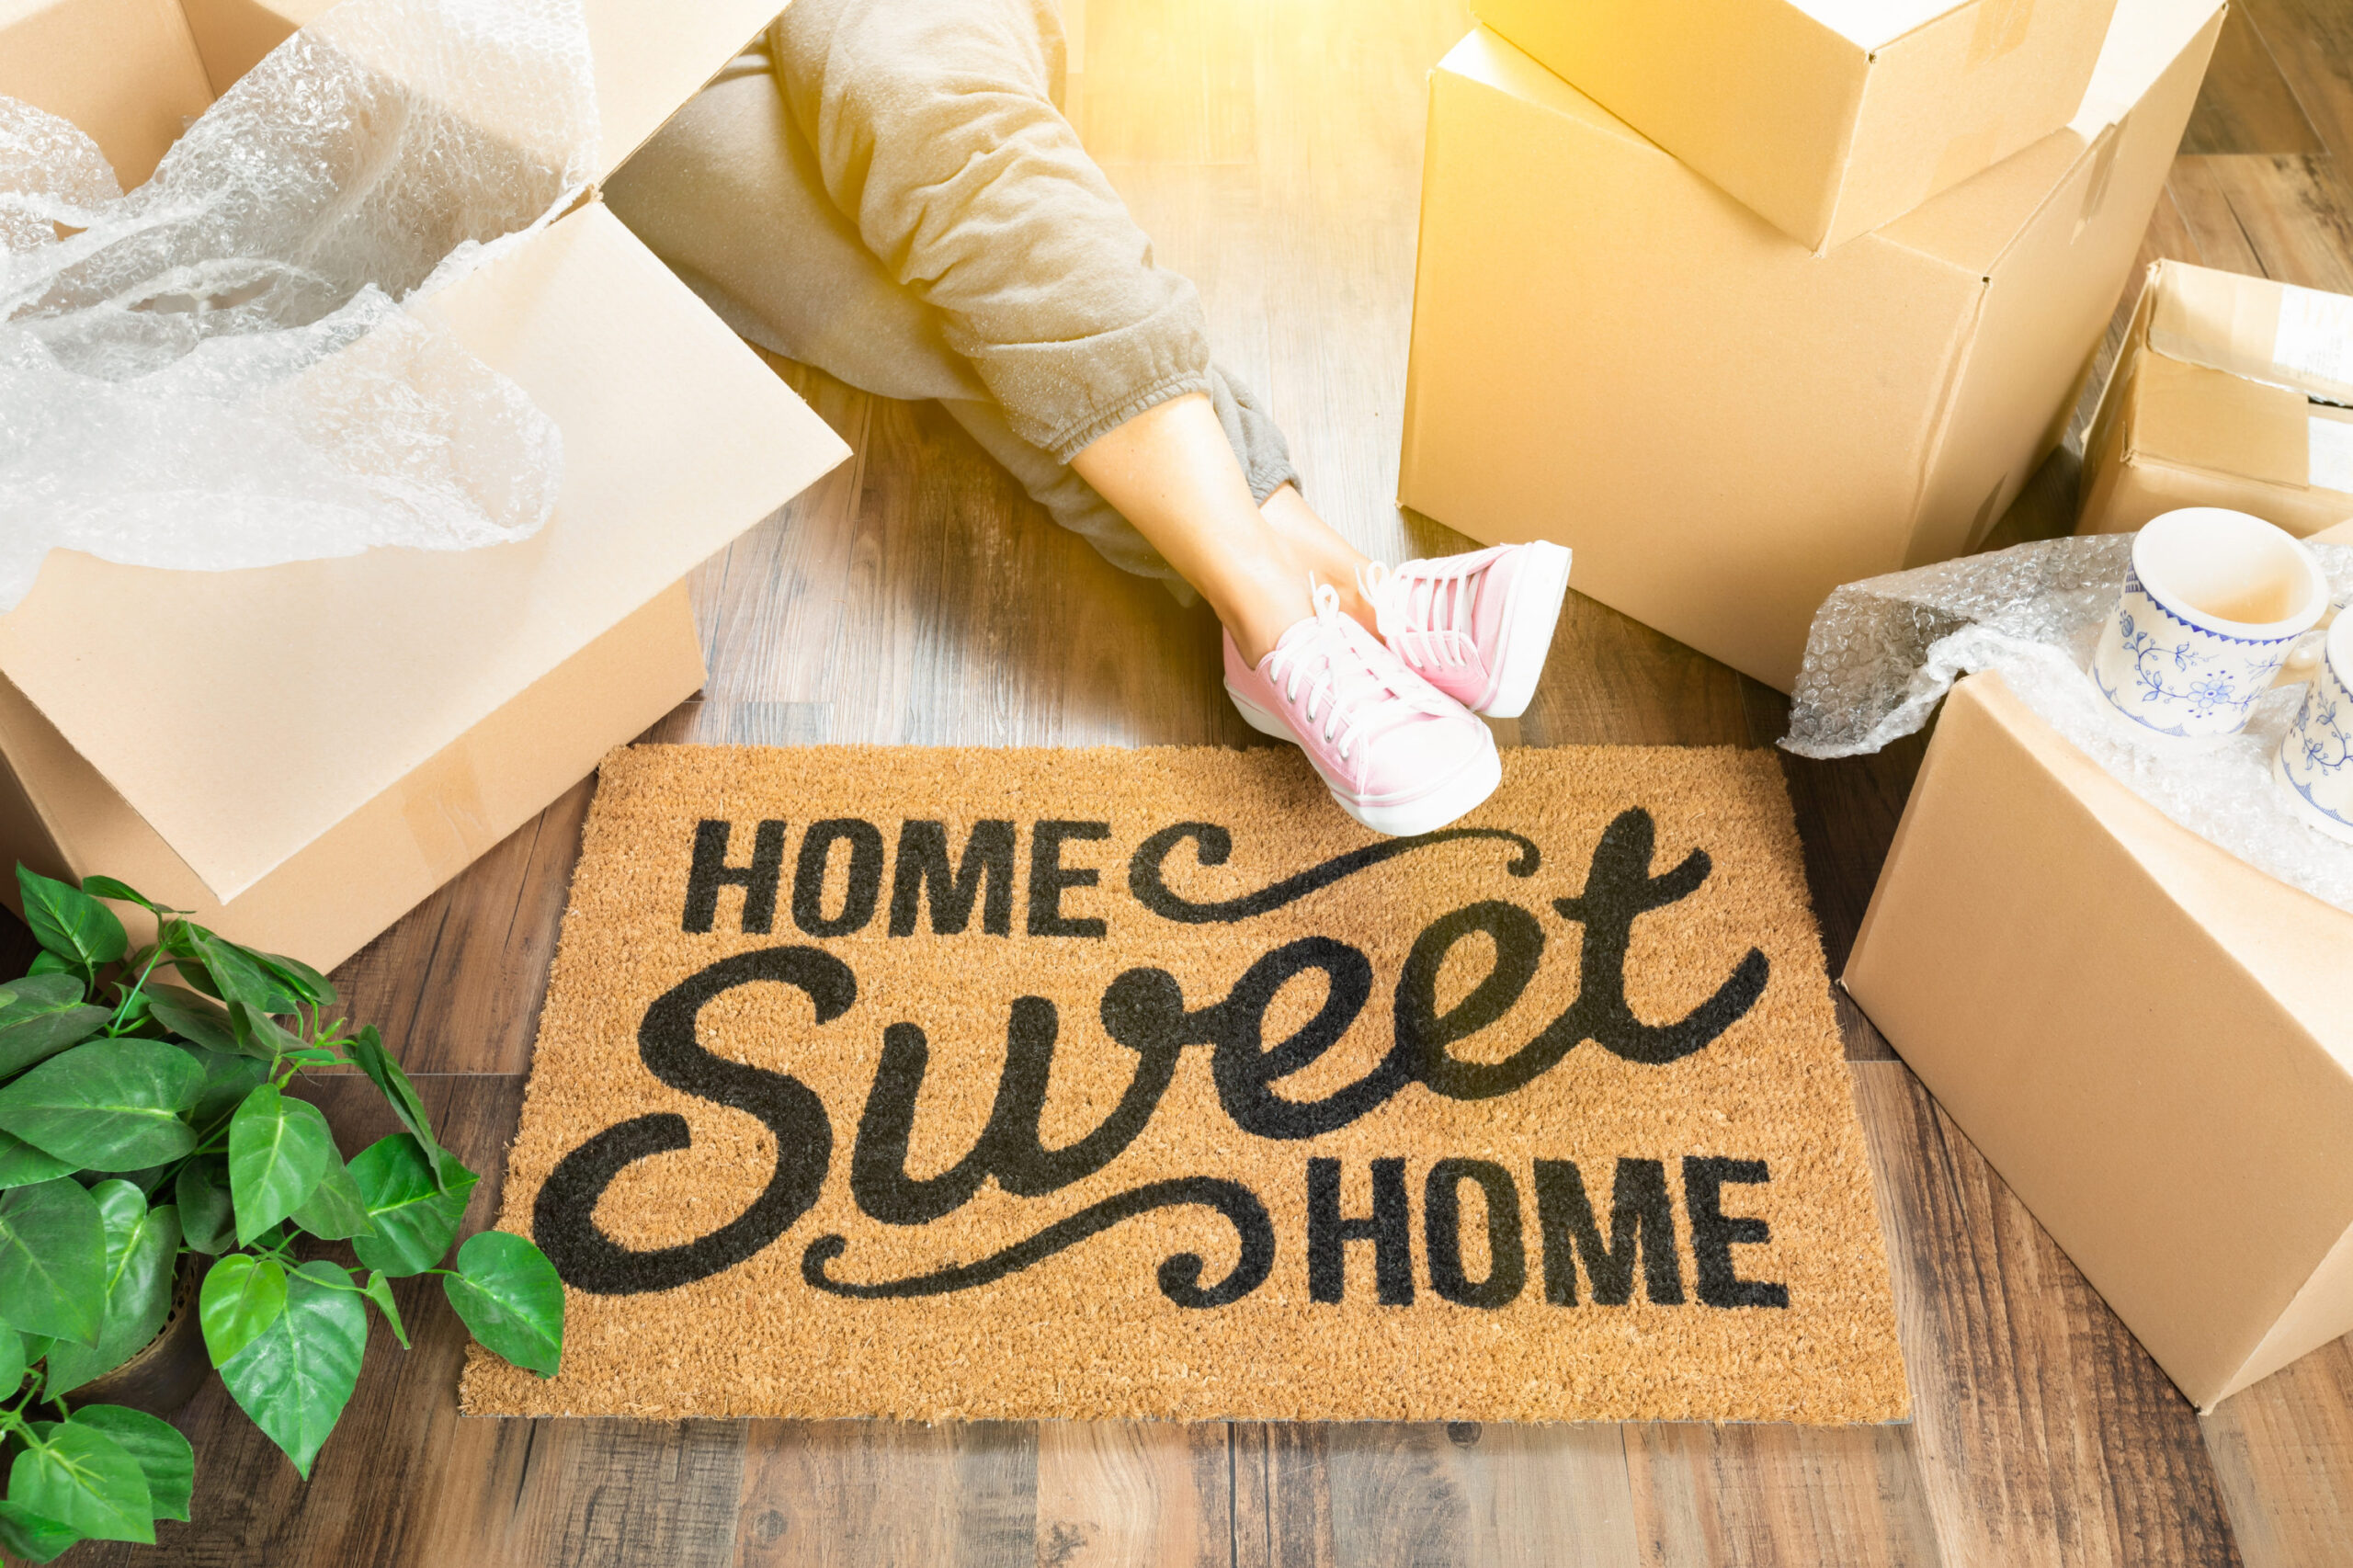 Home sweet home: Your guide to the FHSSS